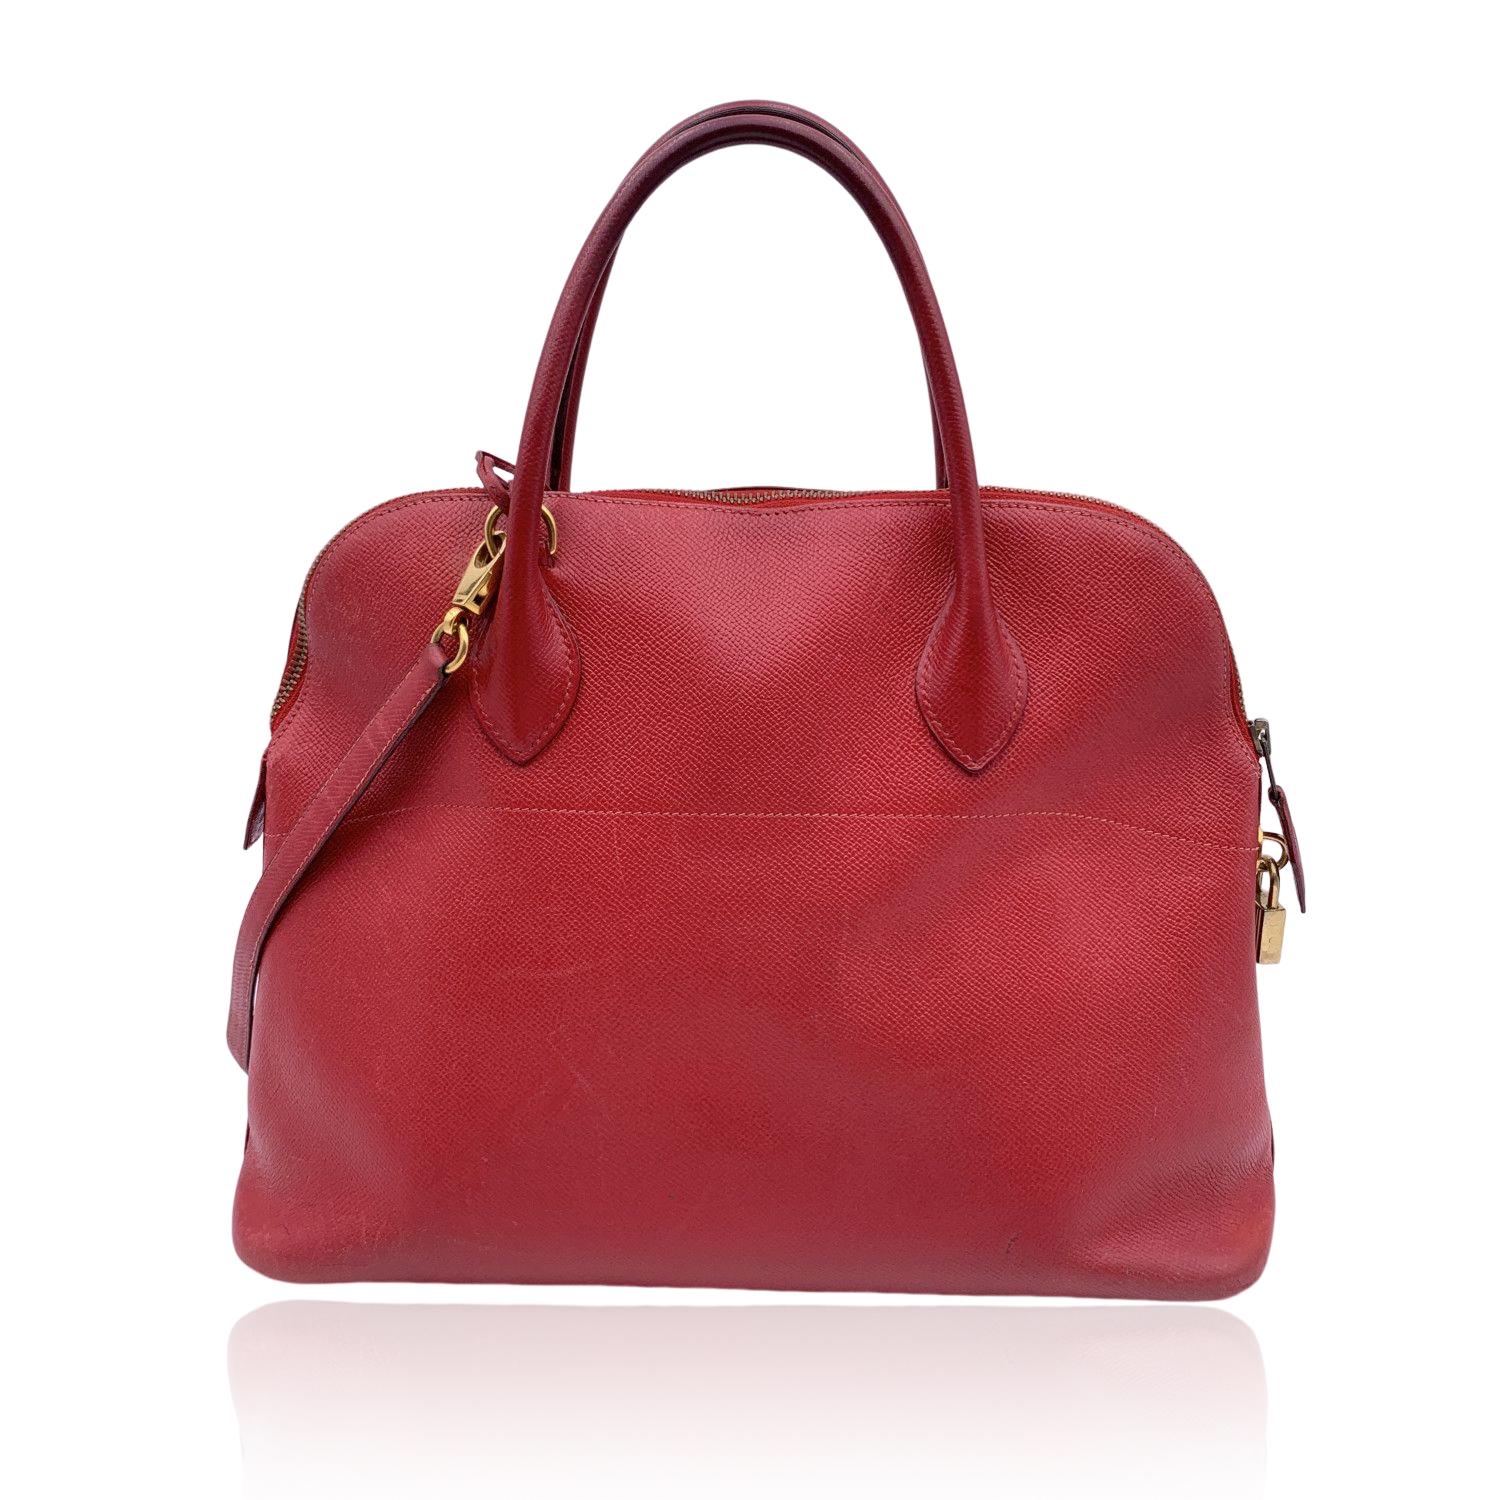 Hermes Vintage 1992 Red Leather Bolide 35 Satchel Bag with Strap In Good Condition For Sale In Rome, Rome